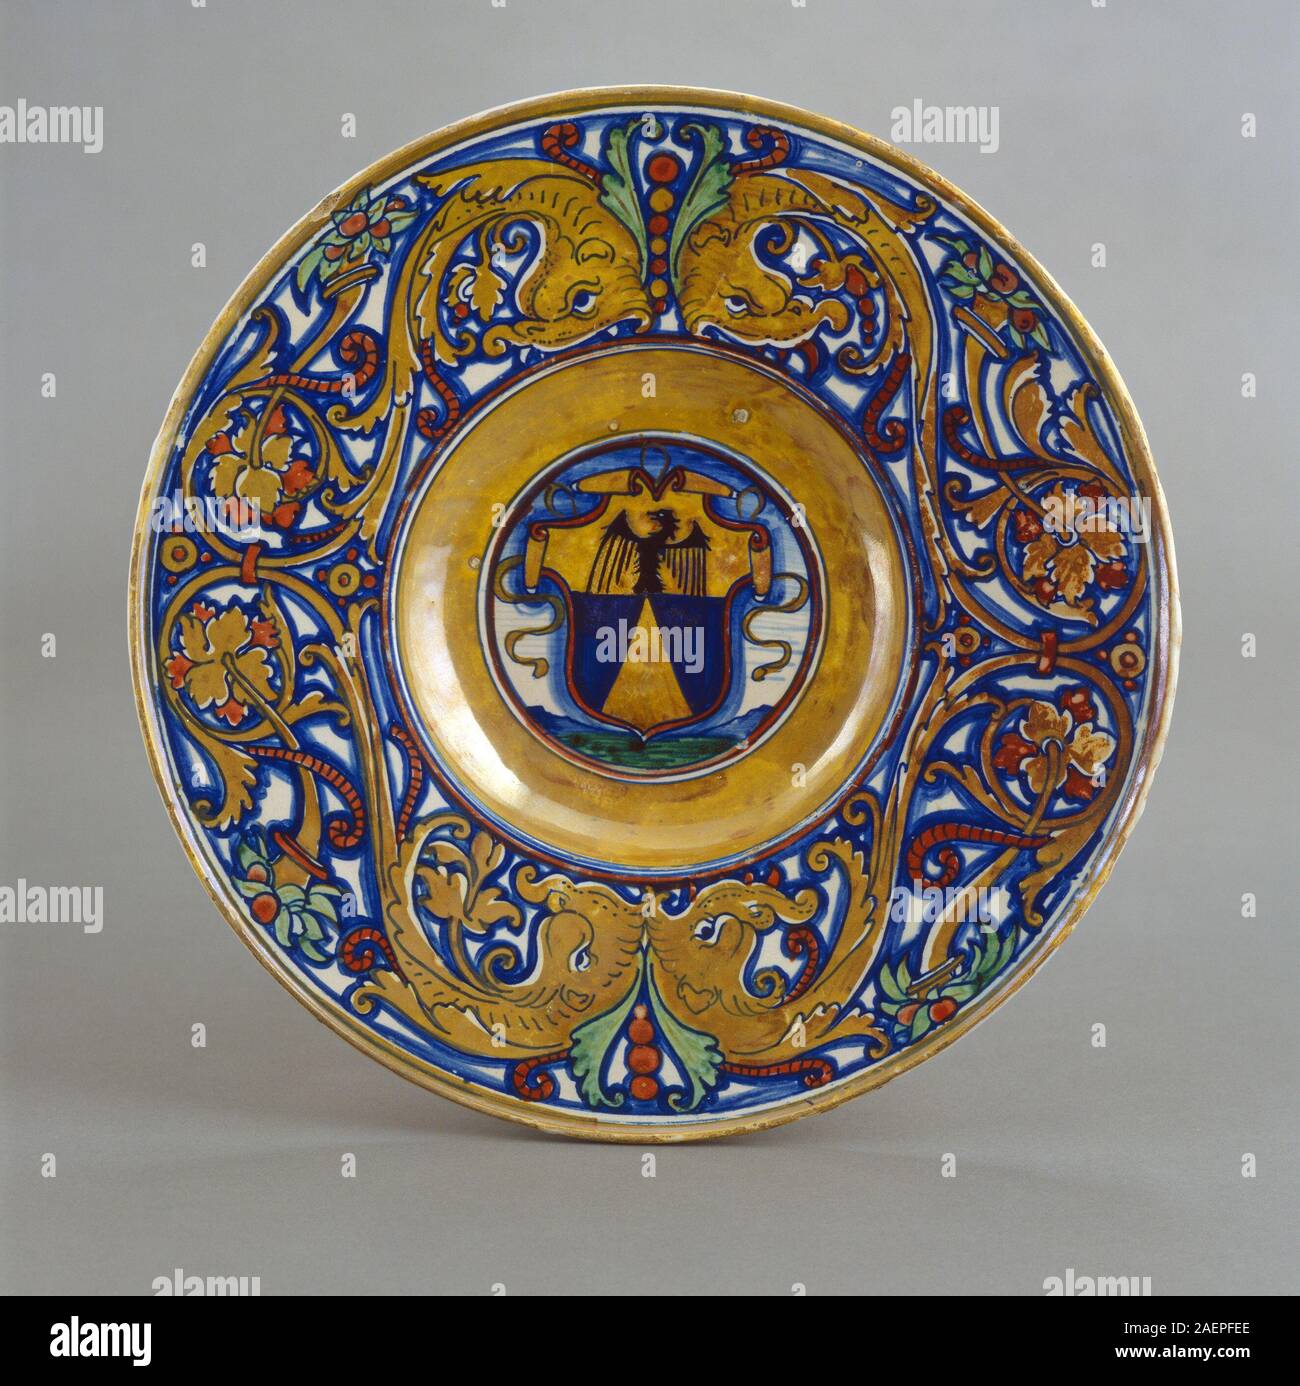 Workshop of Maestro Giorgio Andreoli of Gubbio, Plate with border of foliate scrollwork with dolphin heads and cornucopias; in the center, shield of arms of Vigerio of Savona, 1524, Workshop of Maestro Giorgio Andreoli of Gubbio, Plate with border of foliate scrollwork with dolphin heads and cornucopias; in the center, shield of arms of Vigerio of Savona, 1524, tin-glazed earthenware (maiolica), Widener Collection 1942.9.332 Stock Photo